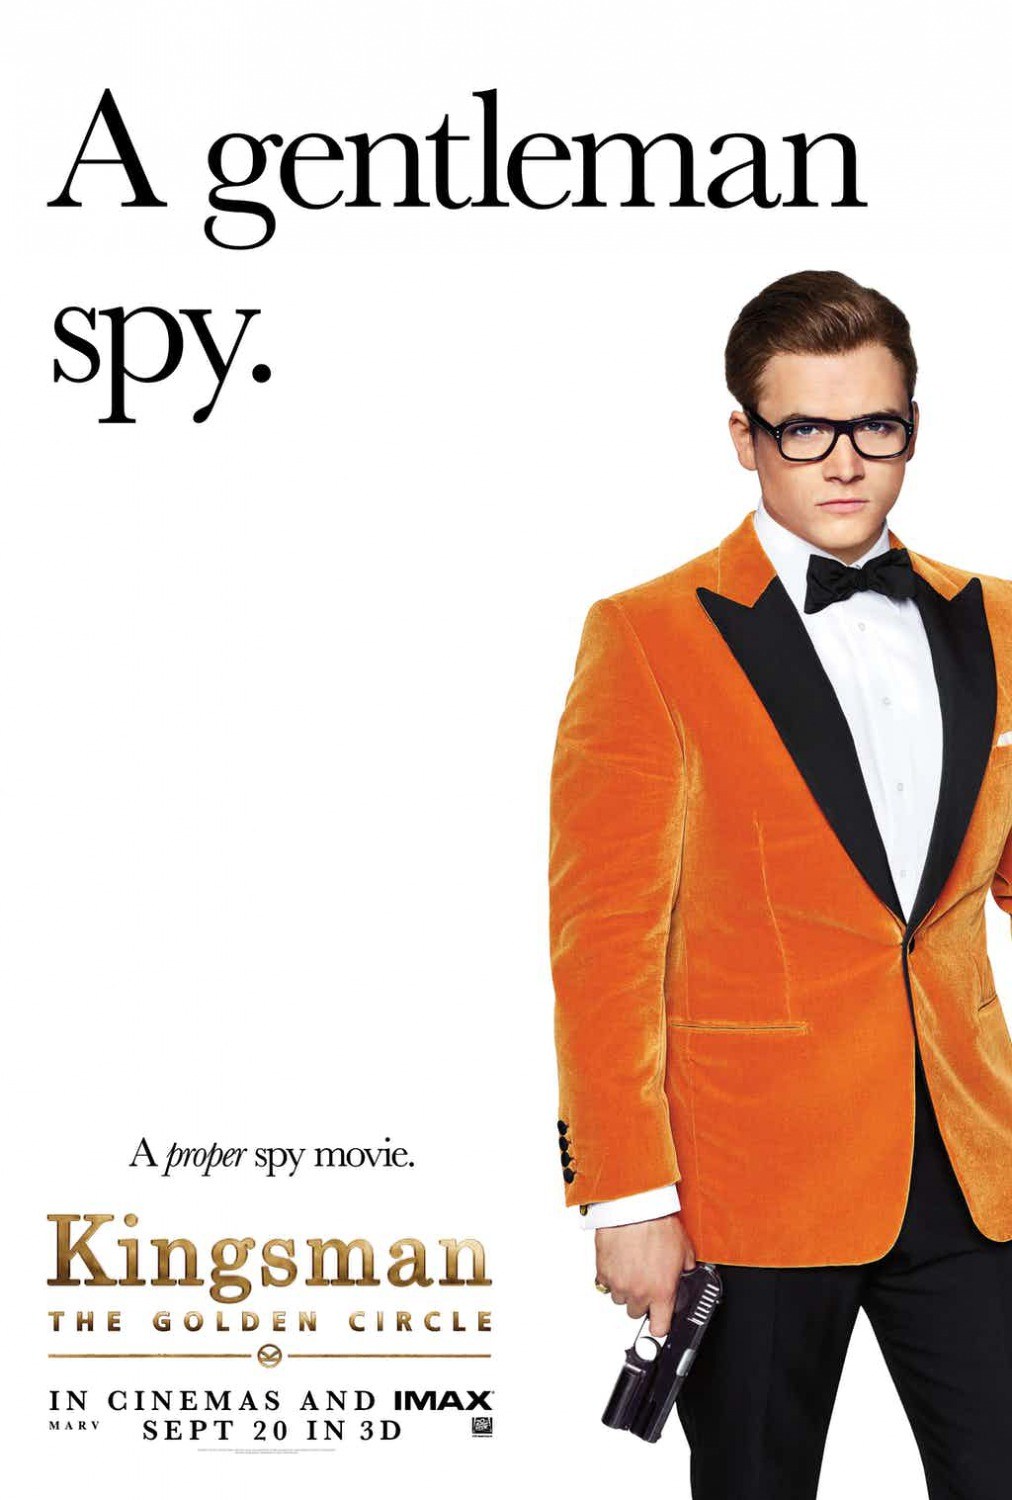 Kingsman 2 doesn’t realize it’s supposed to be silly